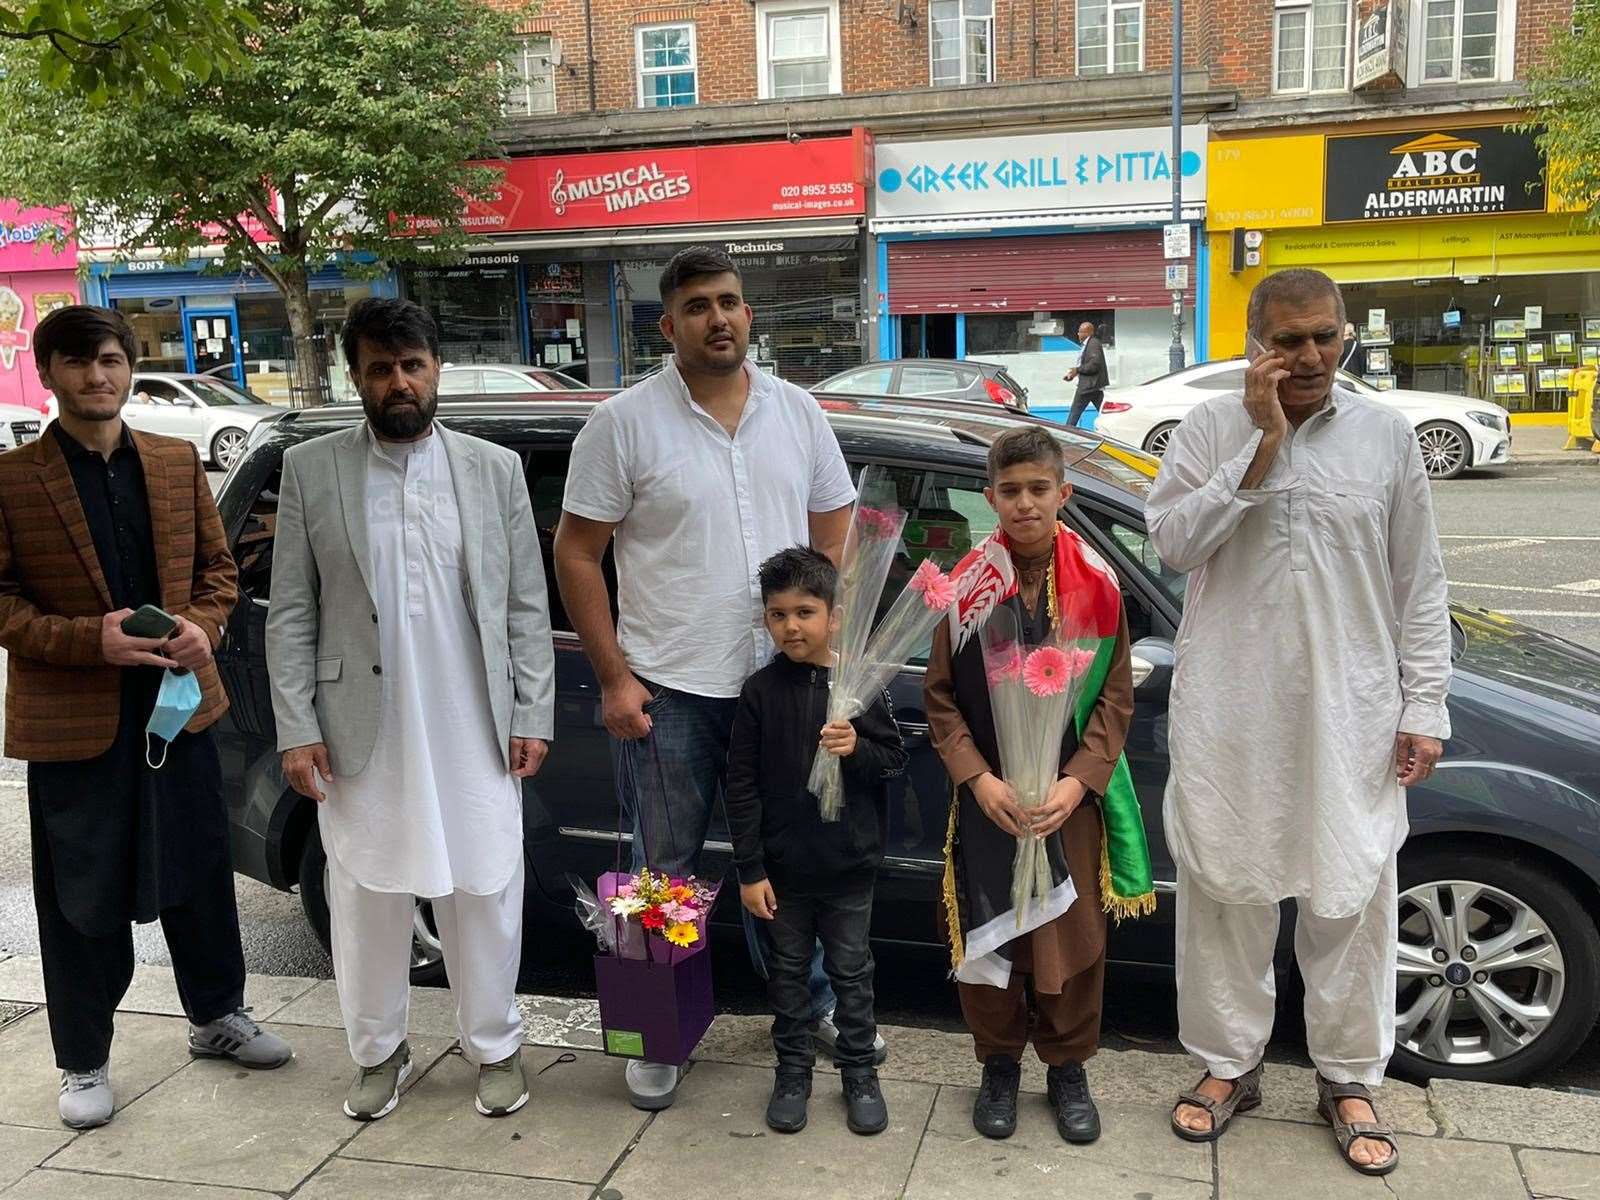 Obaidullah’s family including cousin Qamar (second left) and twin Irfanullah (second right) greeted him with gifts as he stepped off the train at St Pancras (PA)